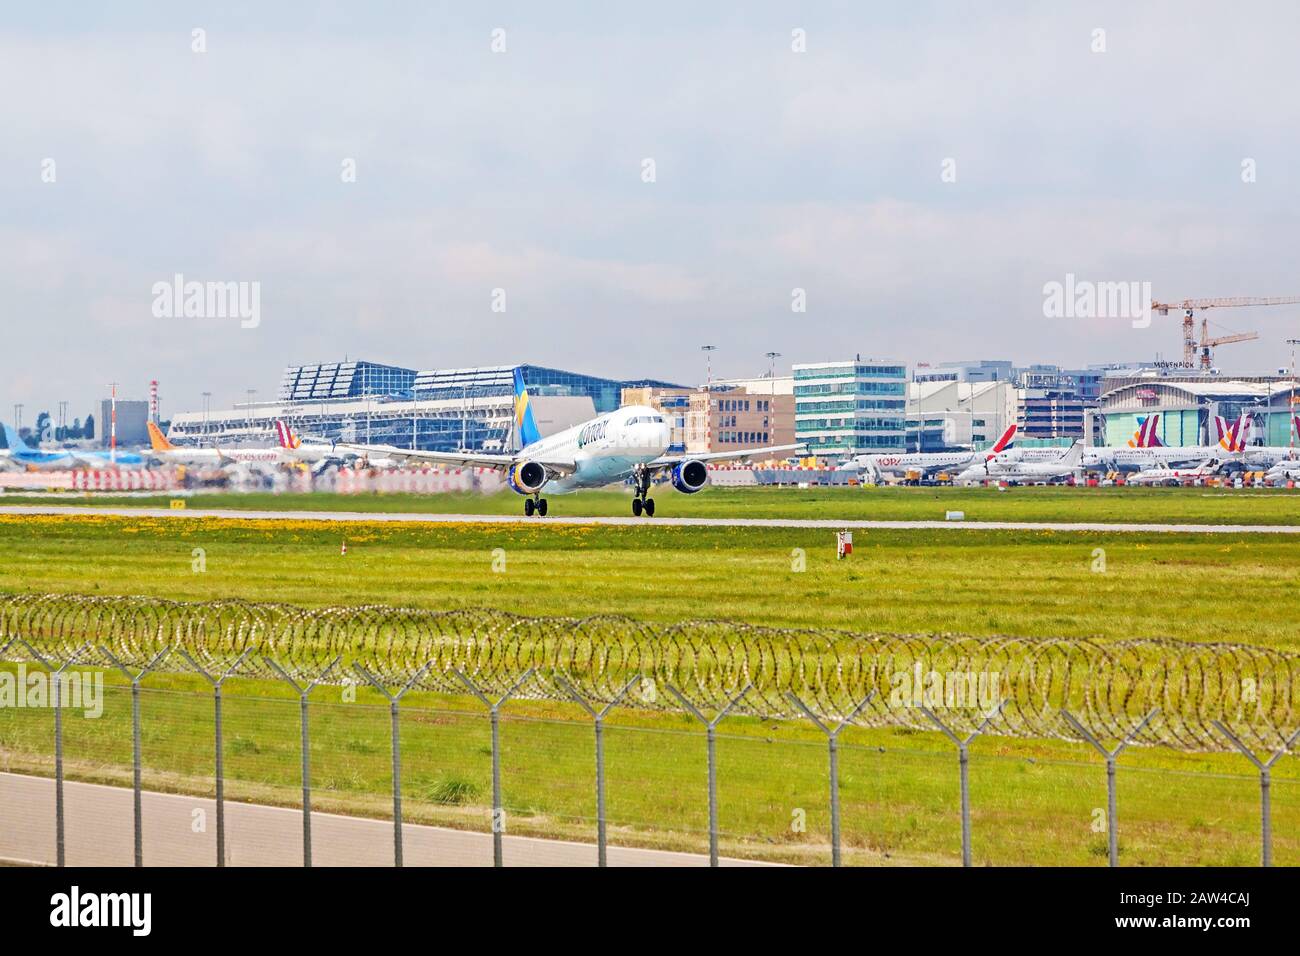 Stuttgart, Germany - April 29, 2017: Airbus airplane A320 from Condor at takeoff from runway - airport Stuttgart terminal in background - green meadow Stock Photo